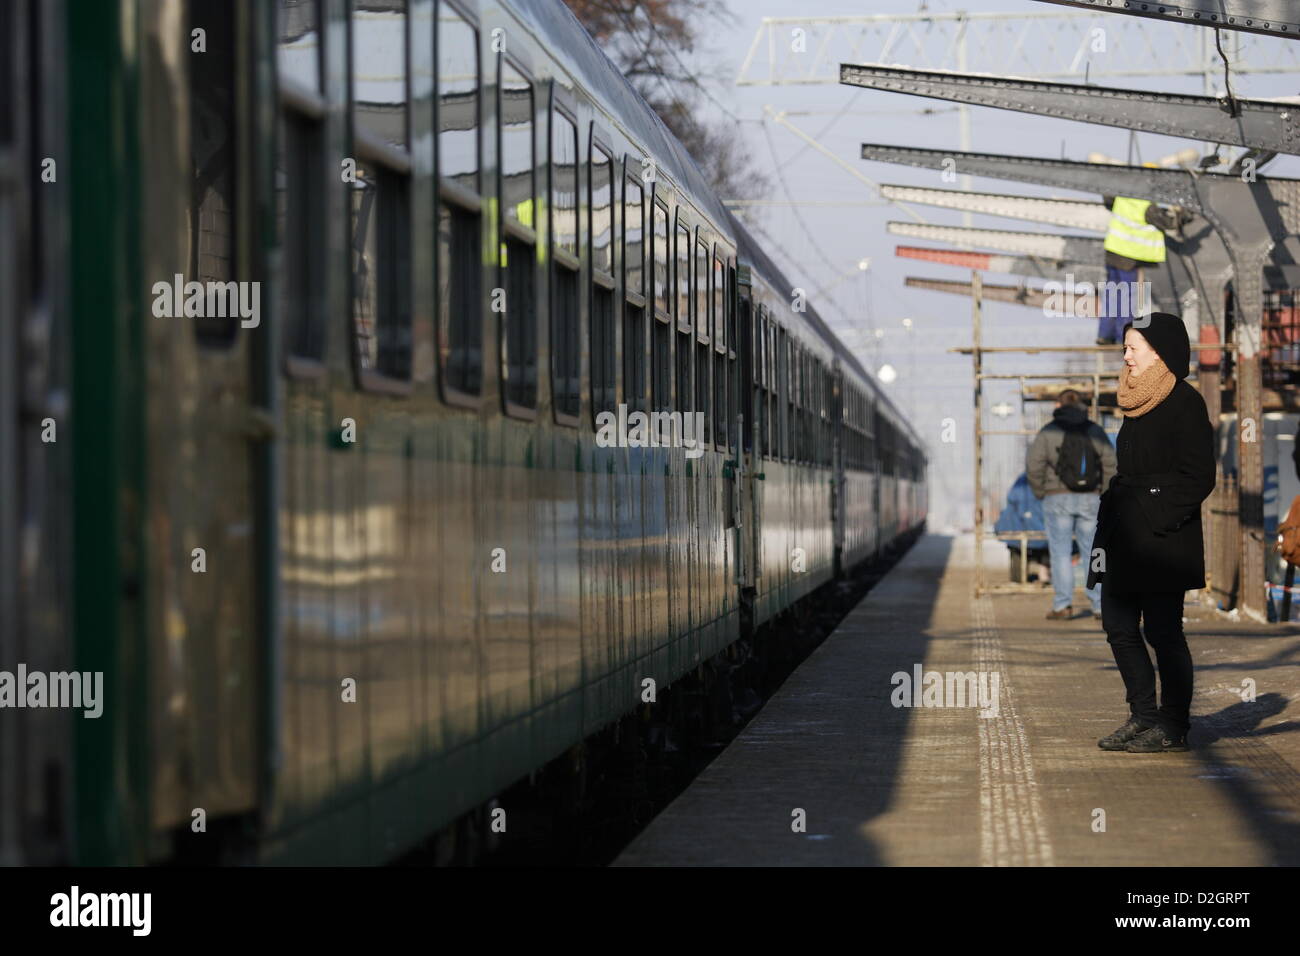 Gdansk, Poland Railway workers in Poland are set to hold a nationwide two-hour strike on Friday 25th, January in protest against cuts to benefits. Rail services are set to come to a standstill on Friday from 7am to 9am. File photo: Railaway Station Gdansk - Oliwa Stock Photo